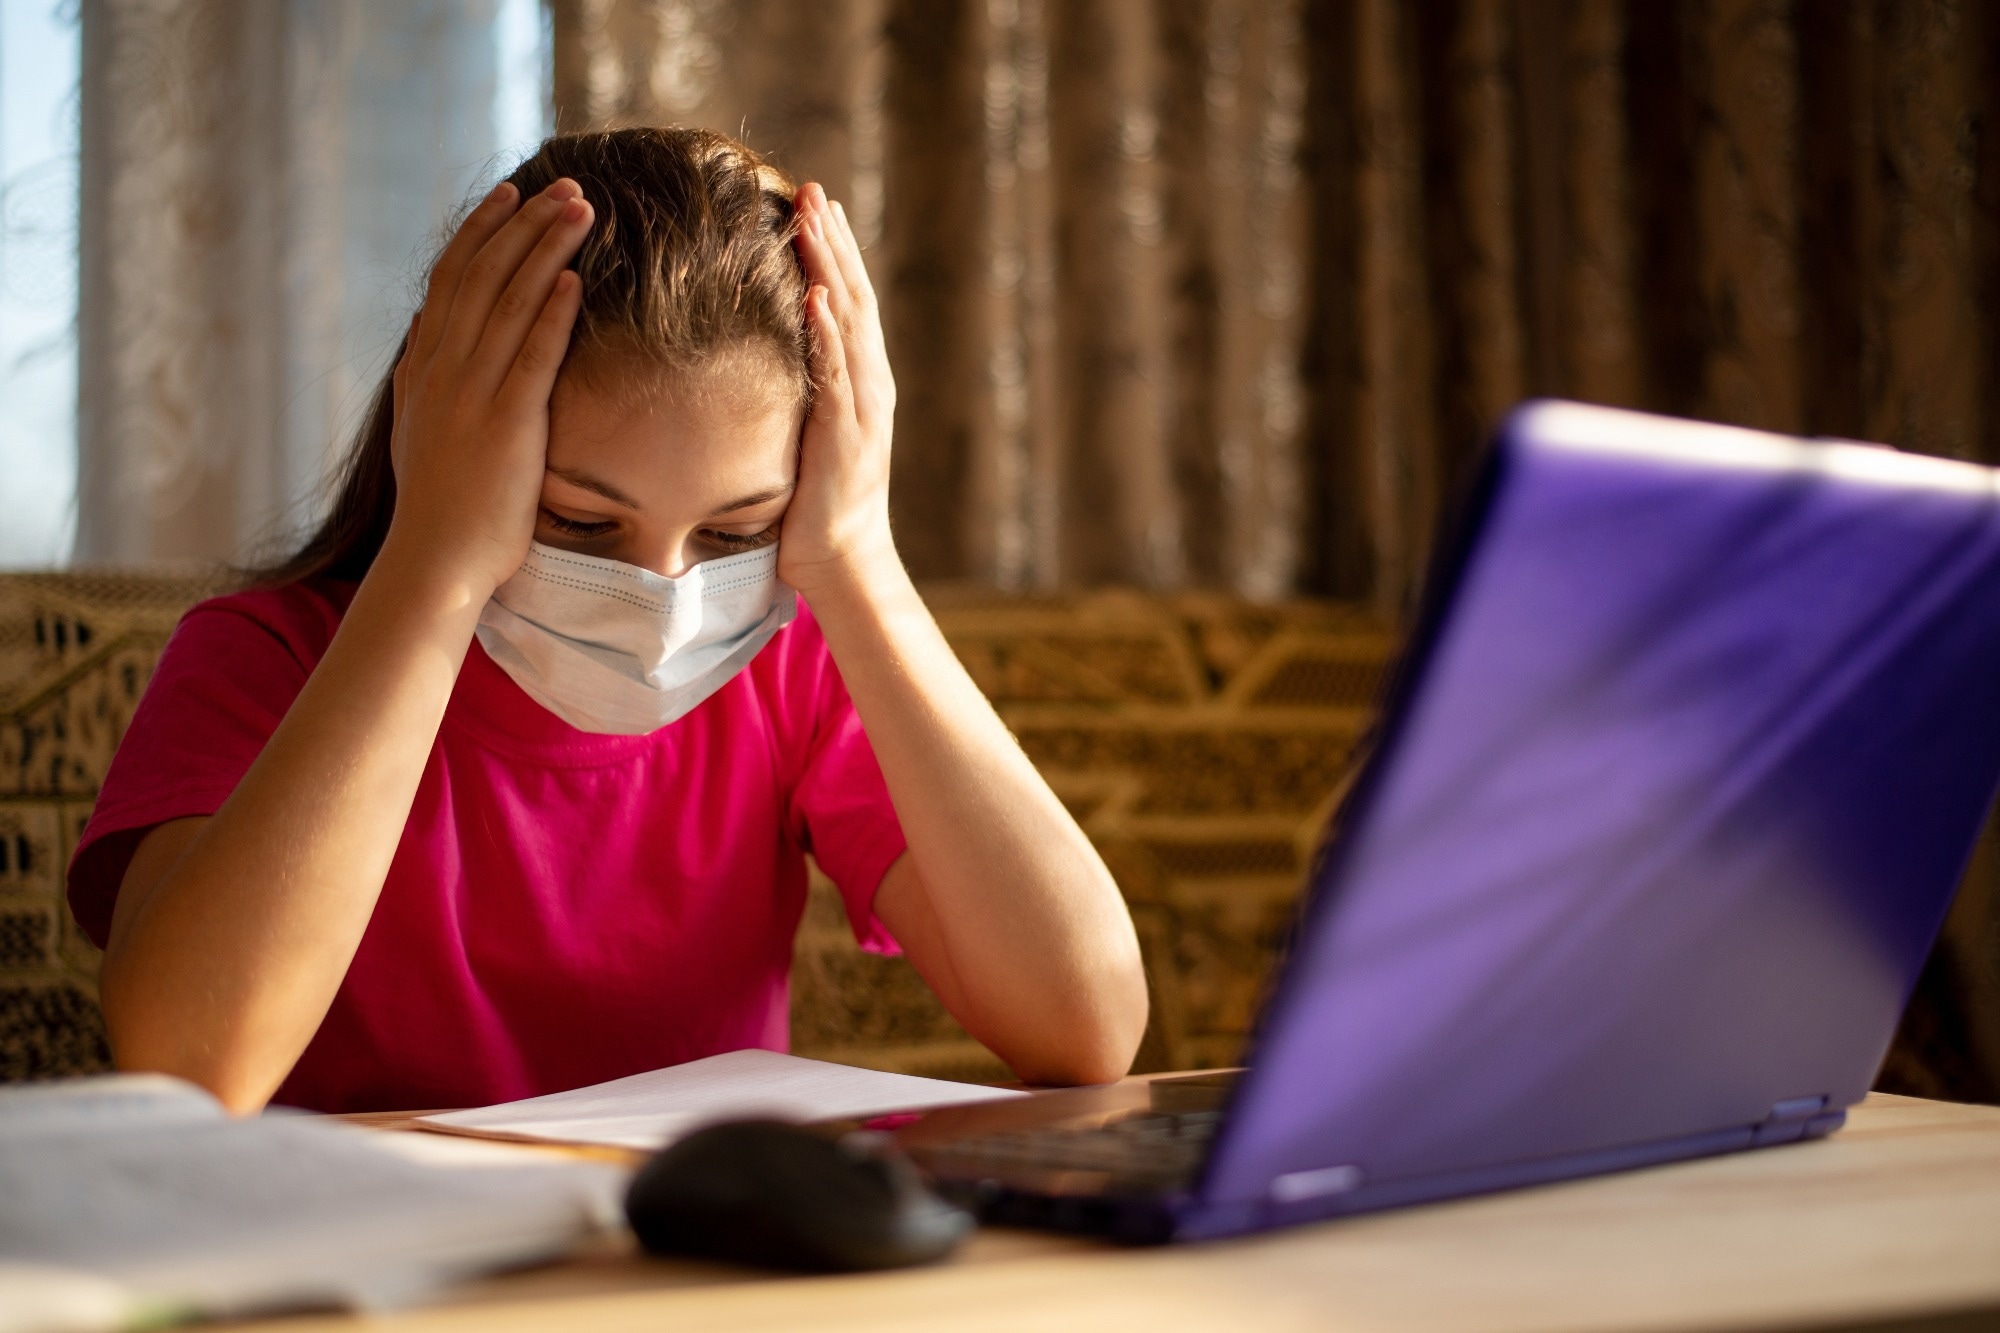 Study: Effects of the COVID-19 Pandemic on Mental Health and Brain Maturation in Adolescents: Implications for Analyzing Longitudinal Data. Image Credit: Vitalii Stock/Shutterstock